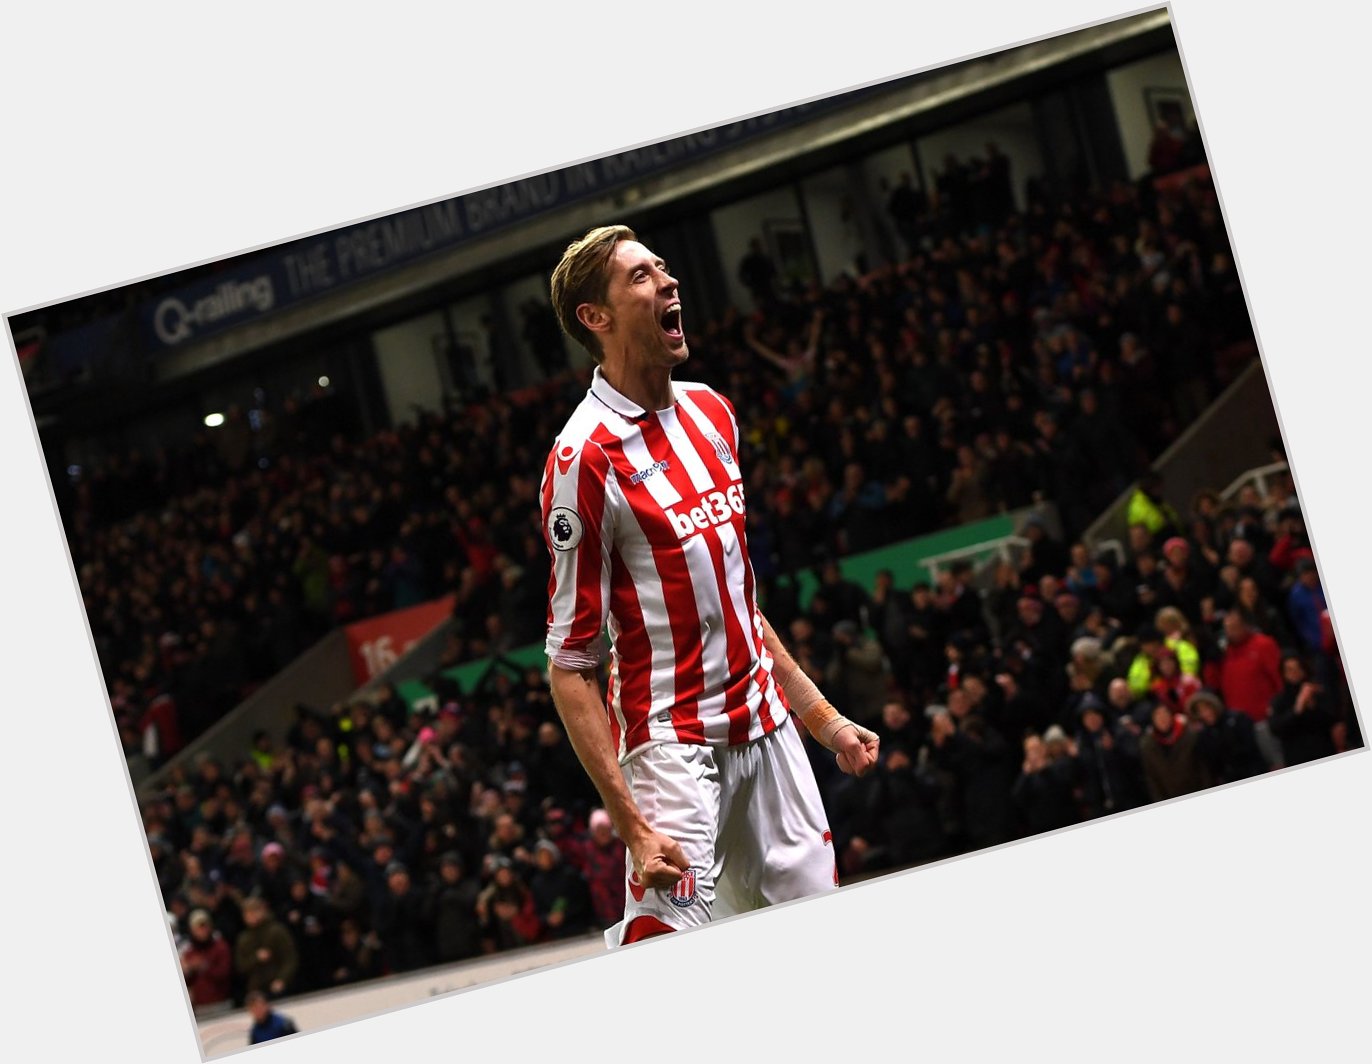 Happy 36th birthday, Peter Crouch.

He\s just 1 away from scoring 100 Premier League goals during his career.
 